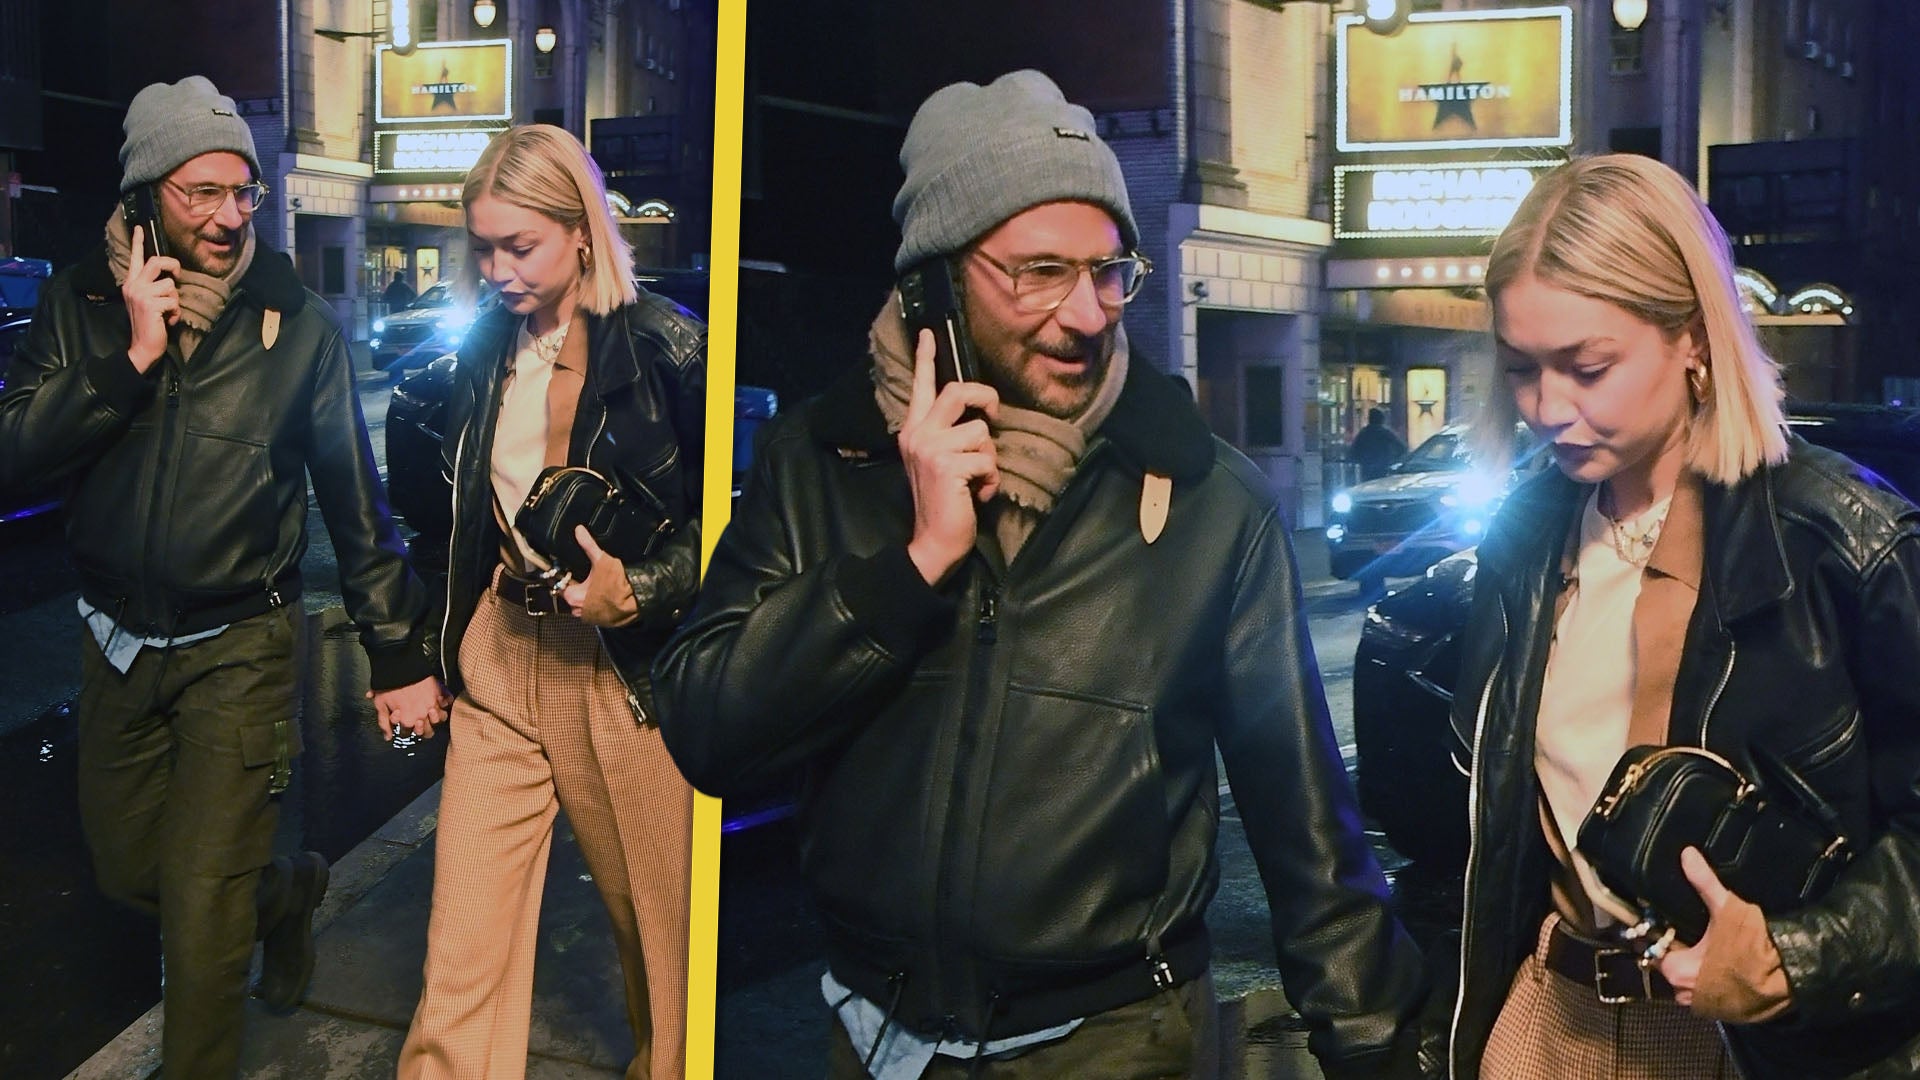 Gigi Hadid and Bradley Cooper Match in Black Jackets and Hold Hands During NYC Date Night